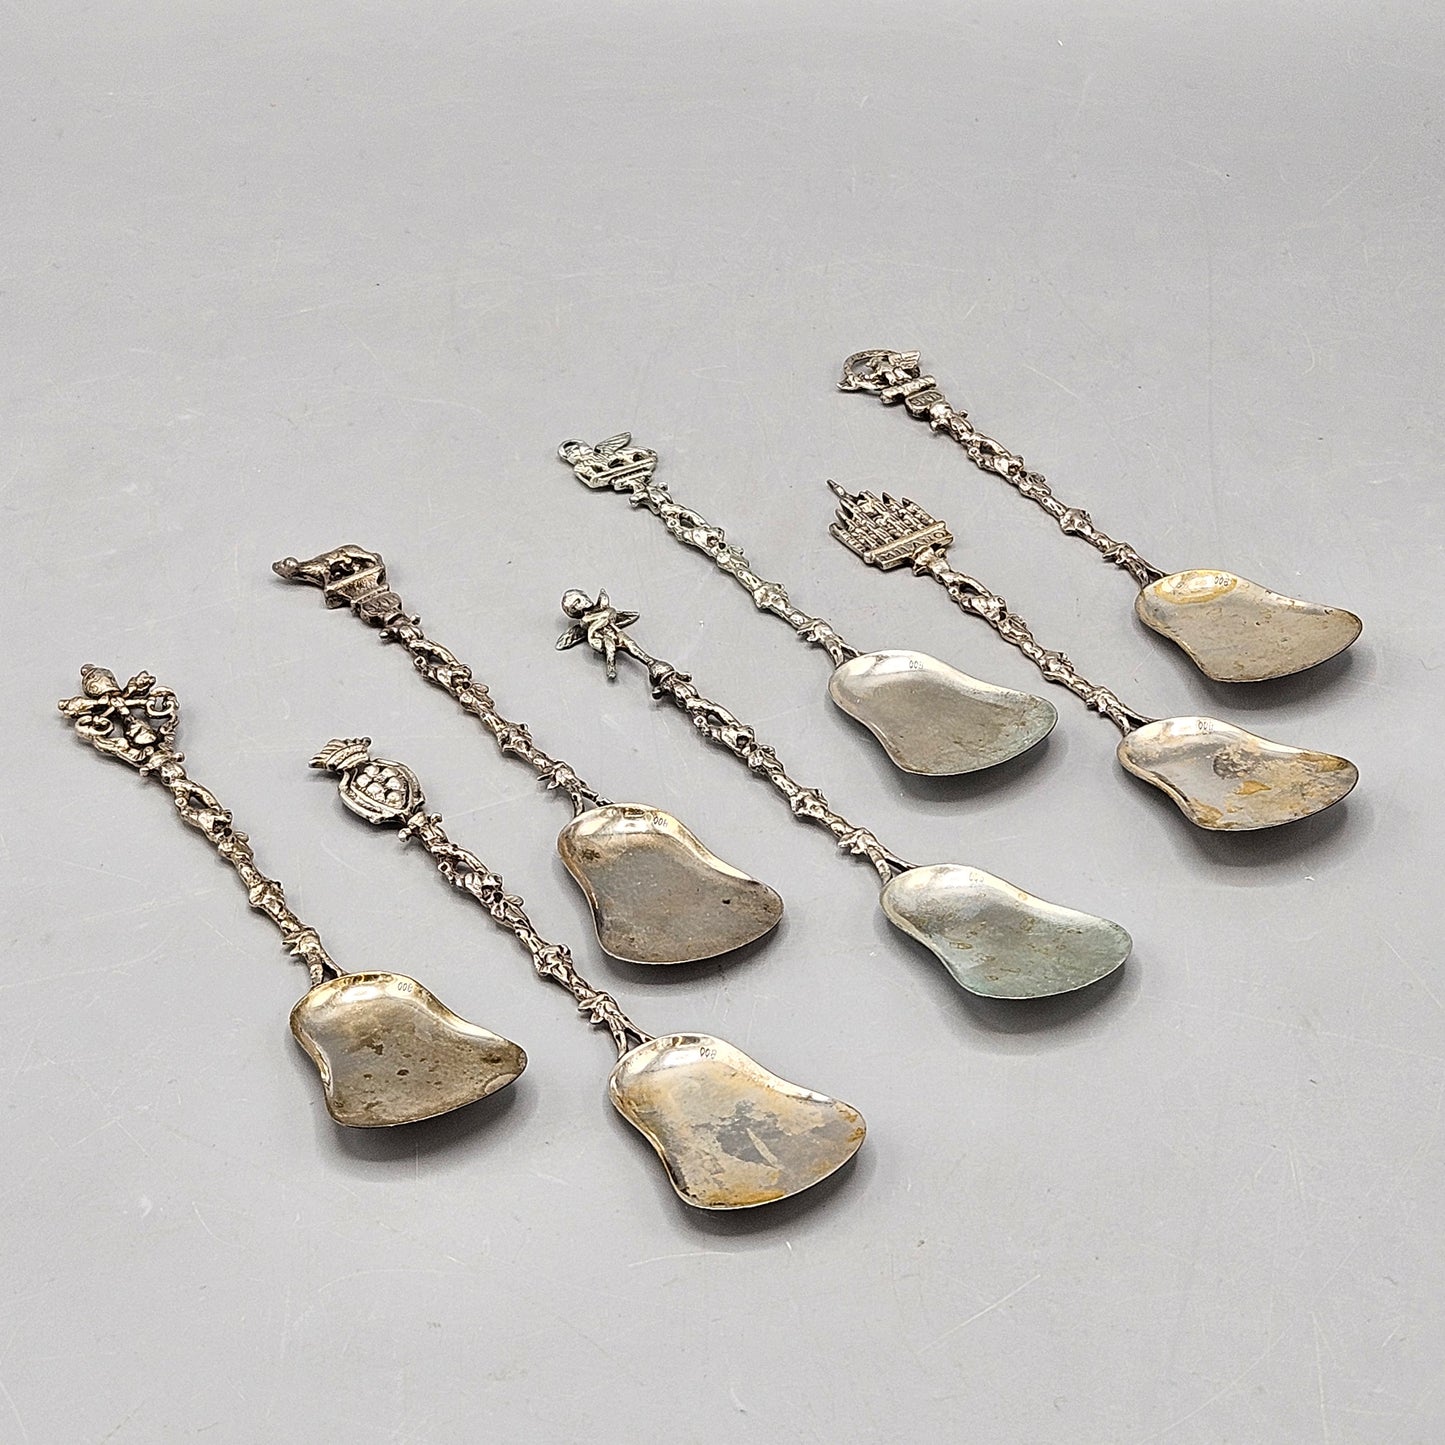 Set of 7 Vintage 800 Silver Figural Spoons from Italy with Shovel Bowls